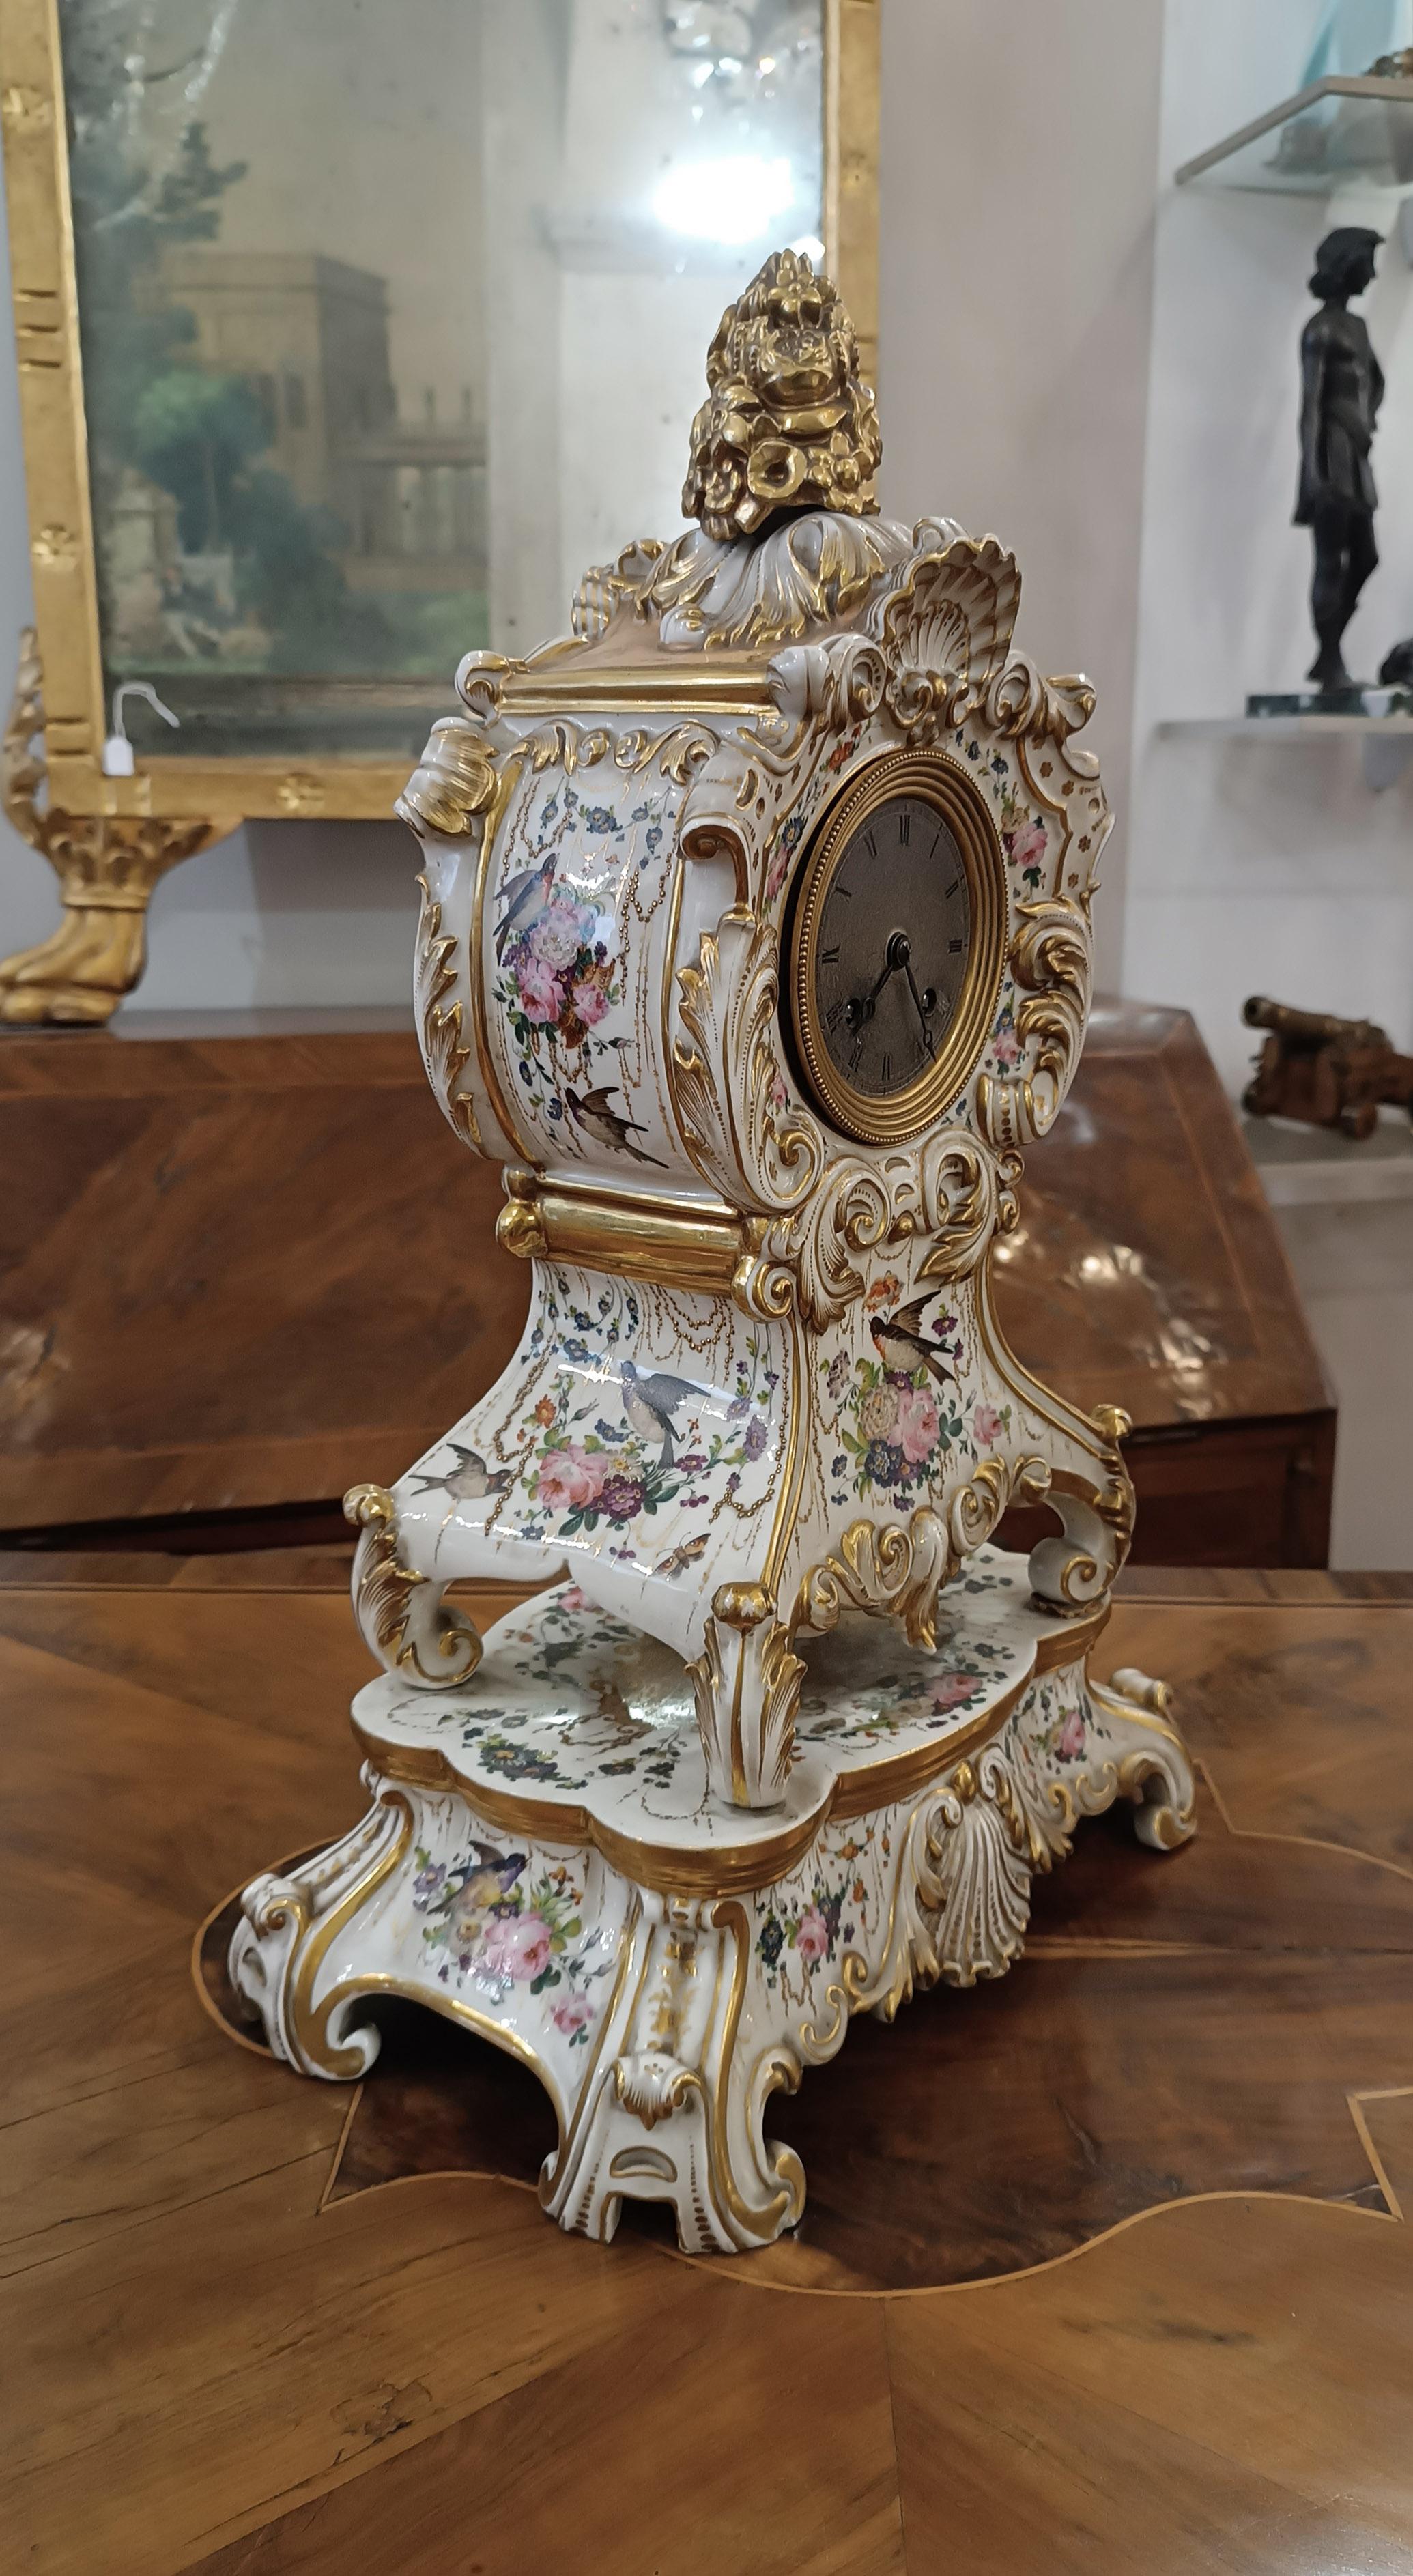 Beautiful and elegant polychrome porcelain clock, with silk thread suspension mechanism. Made from high quality porcelain, it is beautifully gilded and features charming plant motifs, culminating in a golden pine cone. Its surface is also decorated